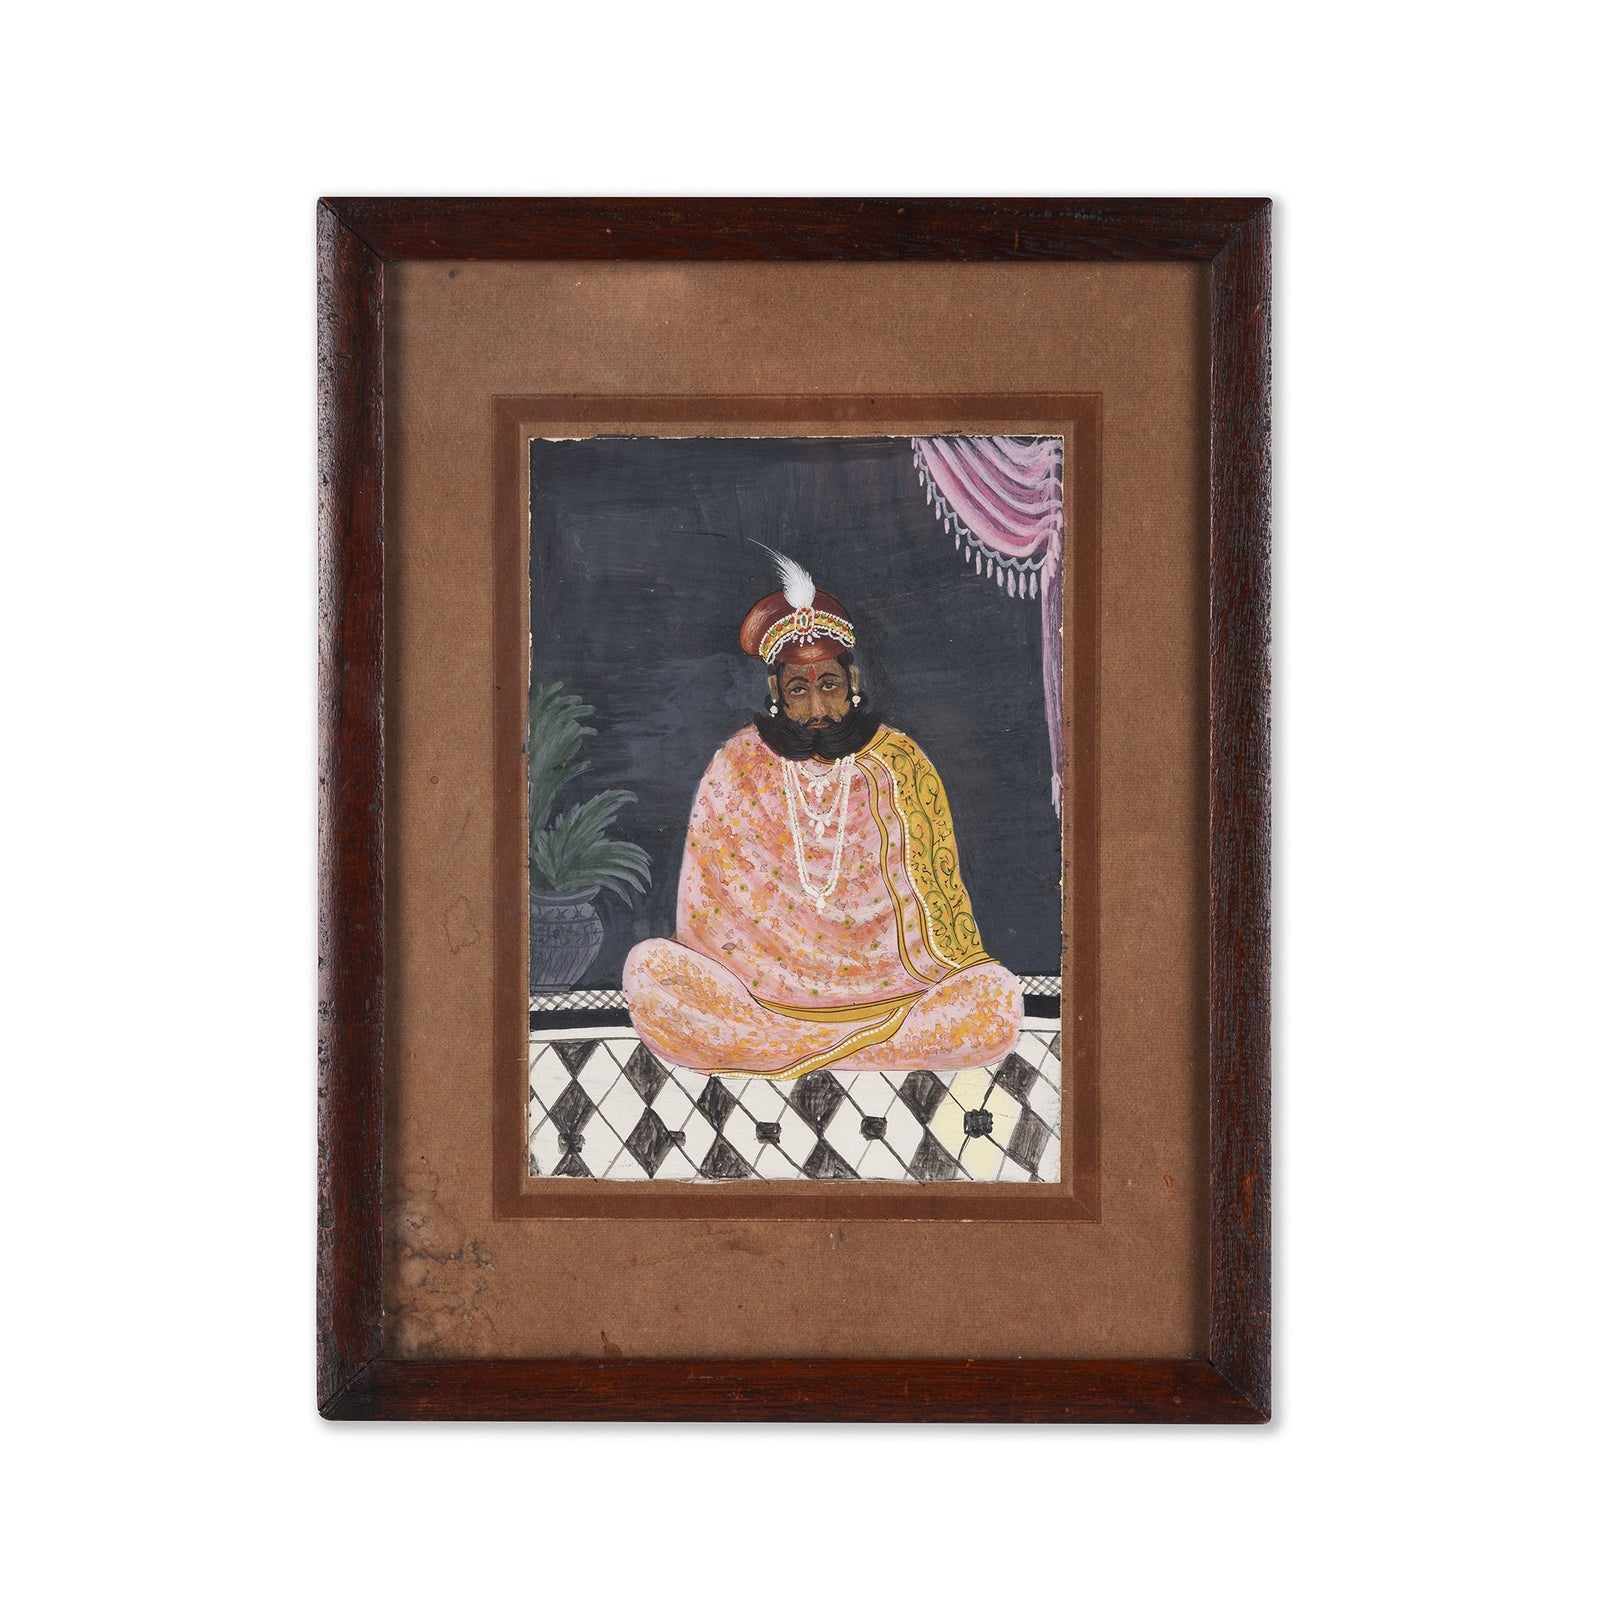 Framed Watercolour Painting - Rajasthan - 19thC - 25x1.3x32 - A4105